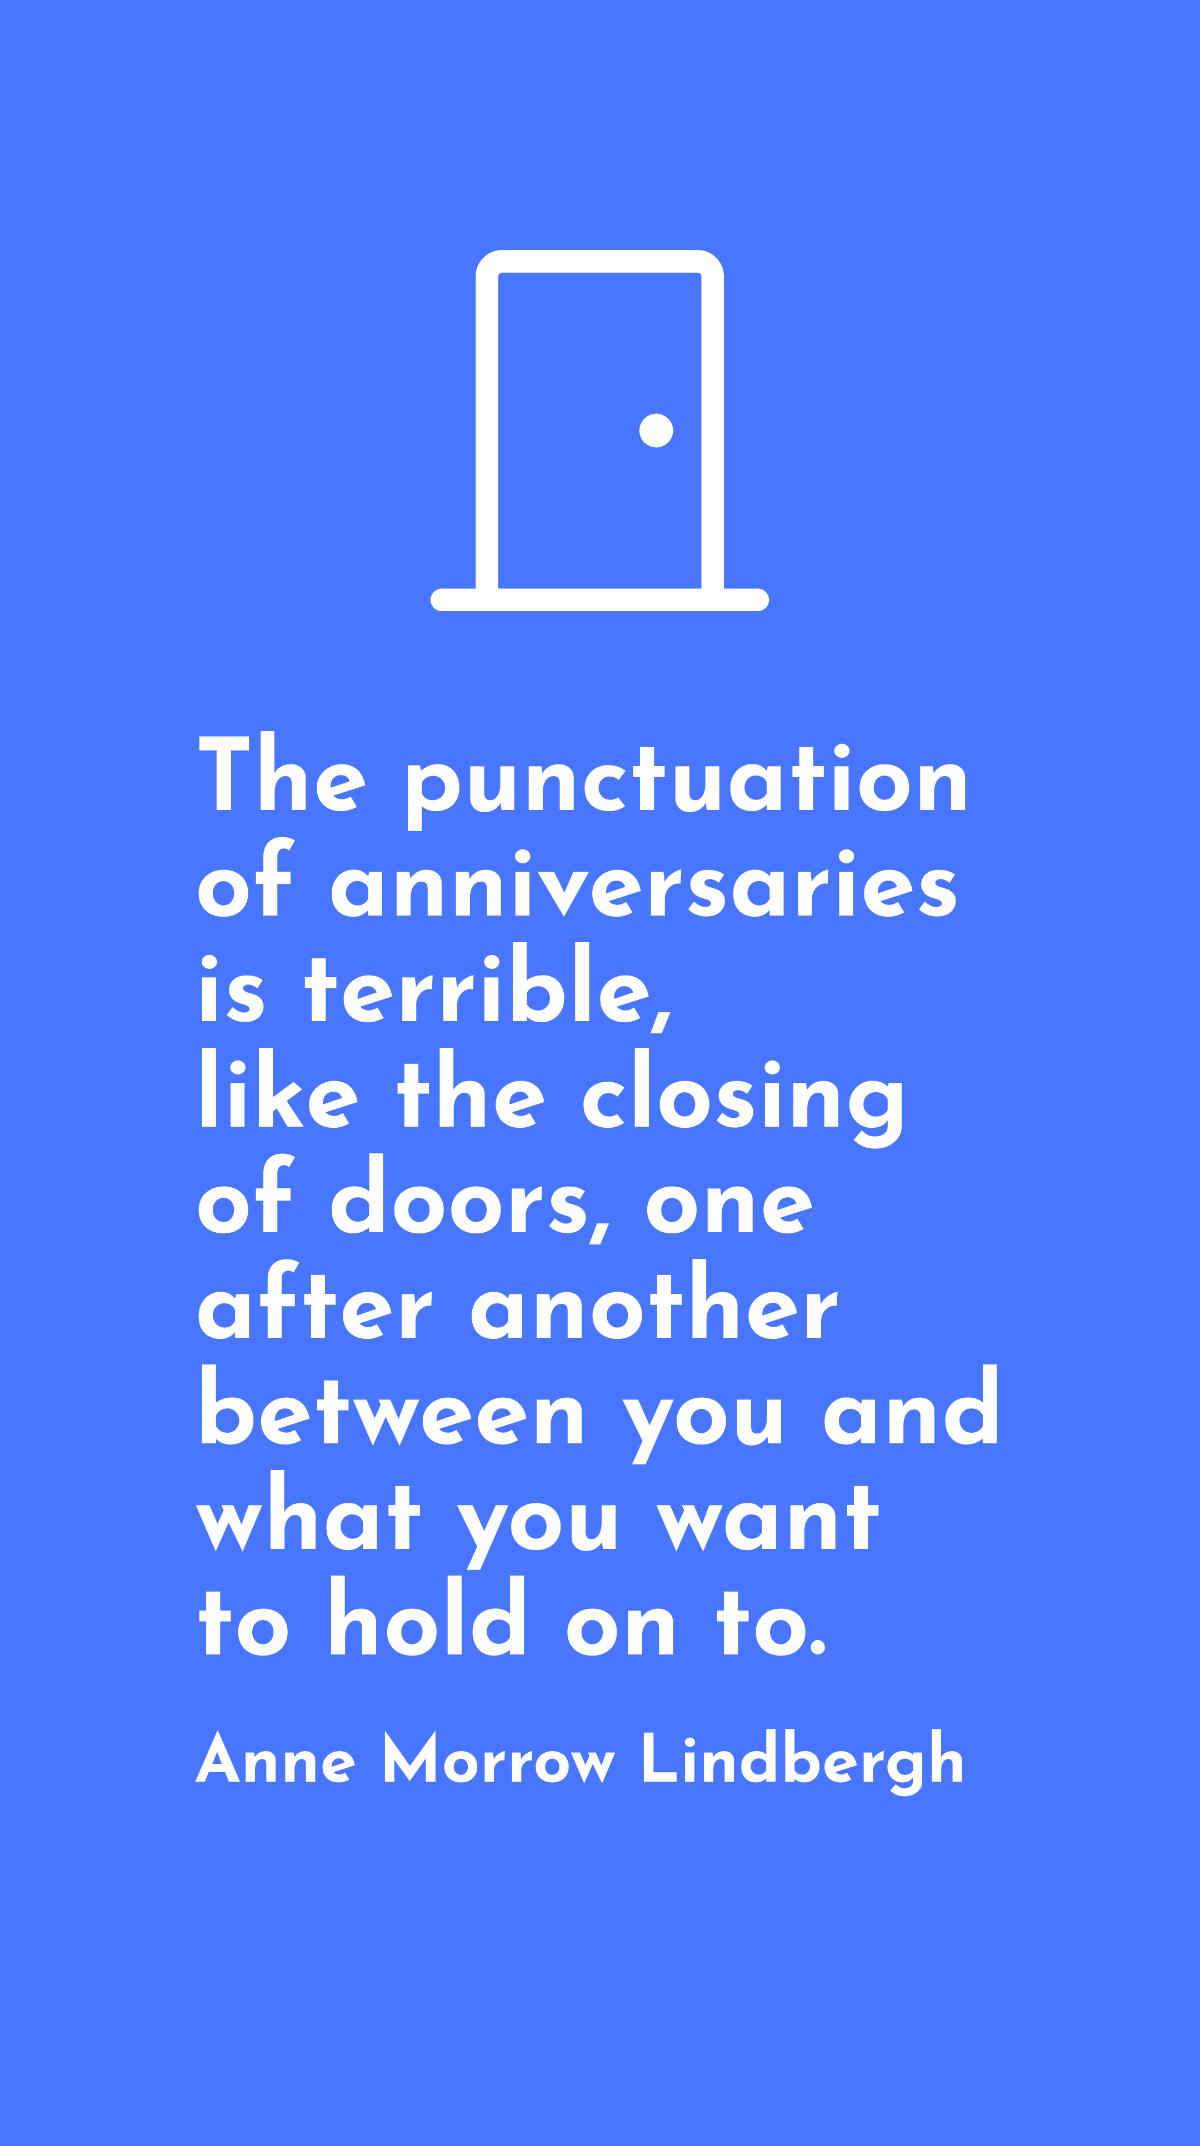 Anne Morrow Lindbergh - The punctuation of anniversaries is terrible, like the closing of doors, one after another between you and what you want to hold on to.